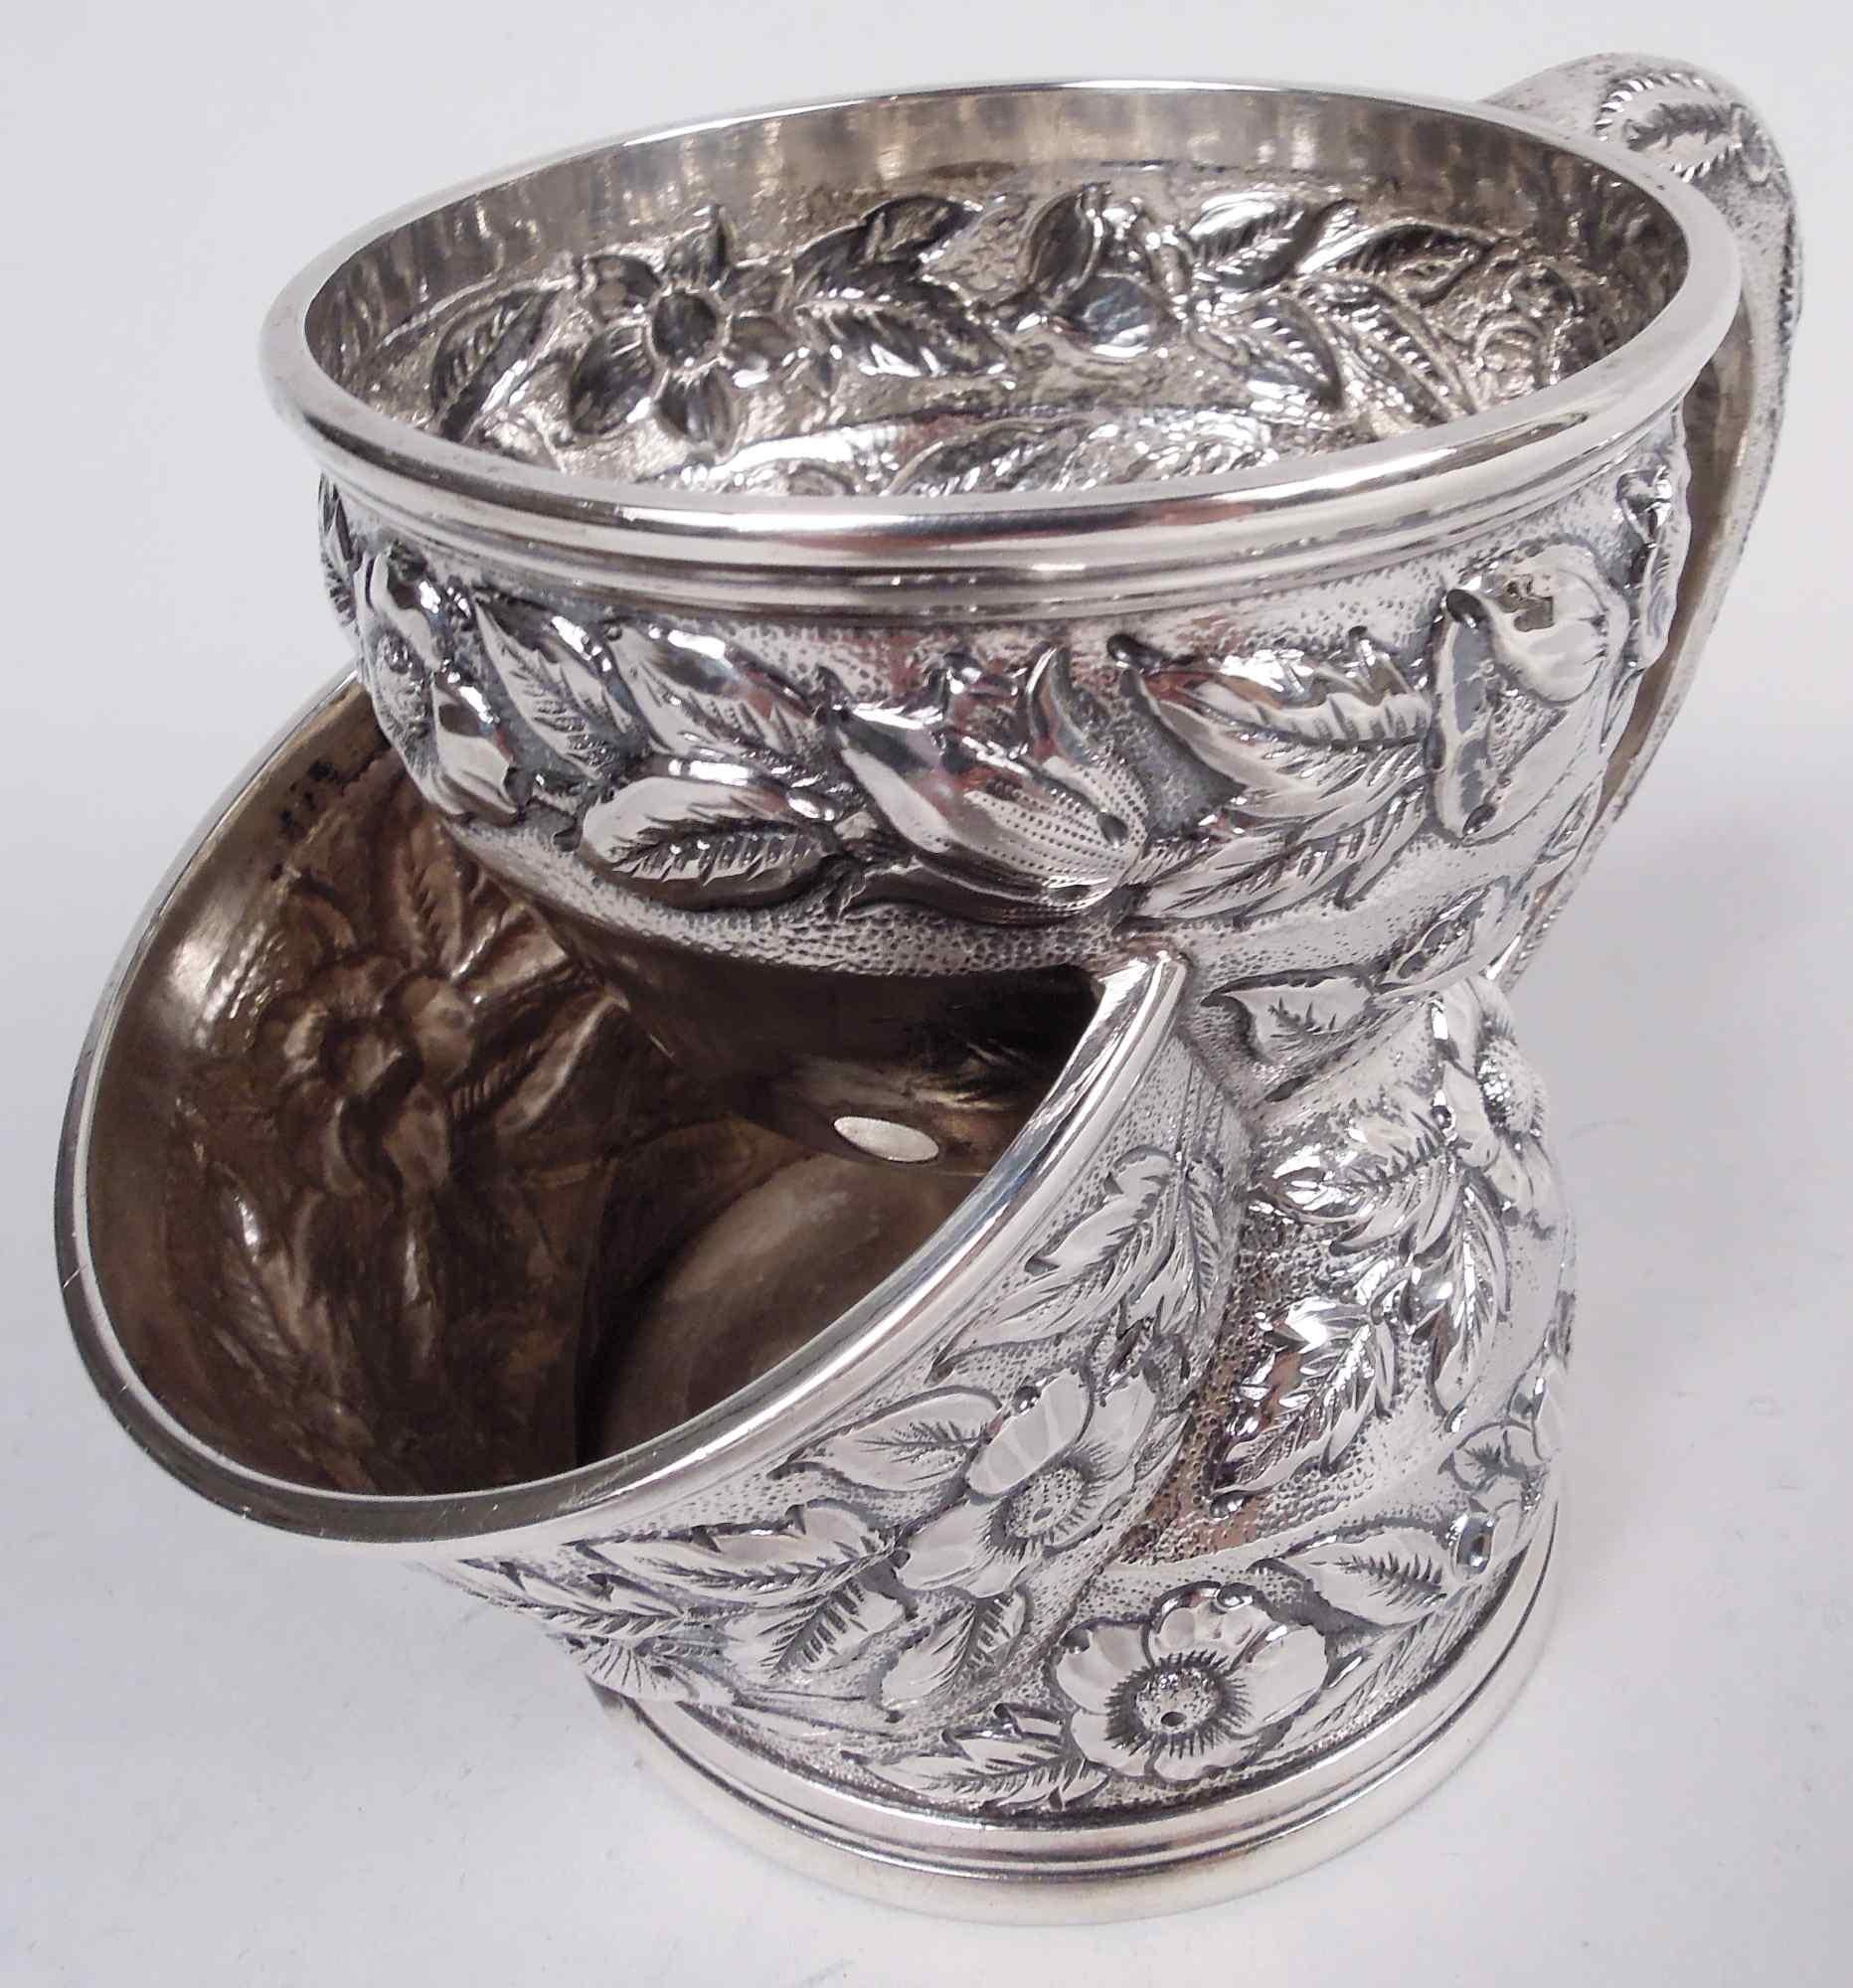 American Victorian sterling silver shaving mug, ca 1880. Curved and waisted with pierced top bowl and second projecting bowl for brush. Frond and flower repousse. Cast scroll handle has same motif. Marked “Black, Starr & Frost / New-York /